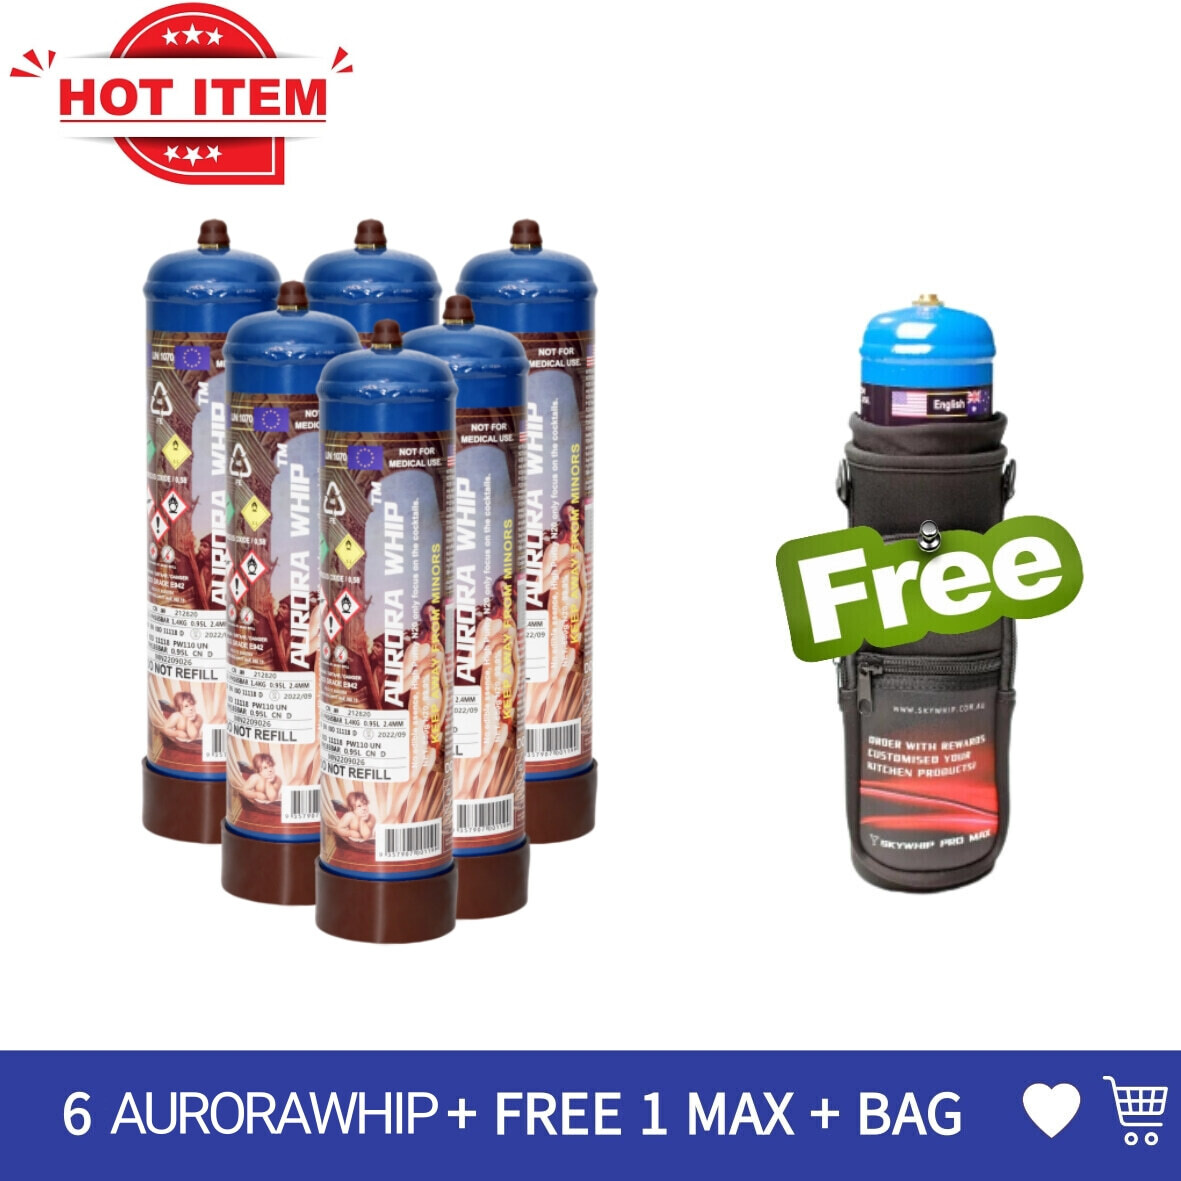 Cream Chargers: 6x 580g Cylinder Aurora Whip Max + Free Tank & Bag